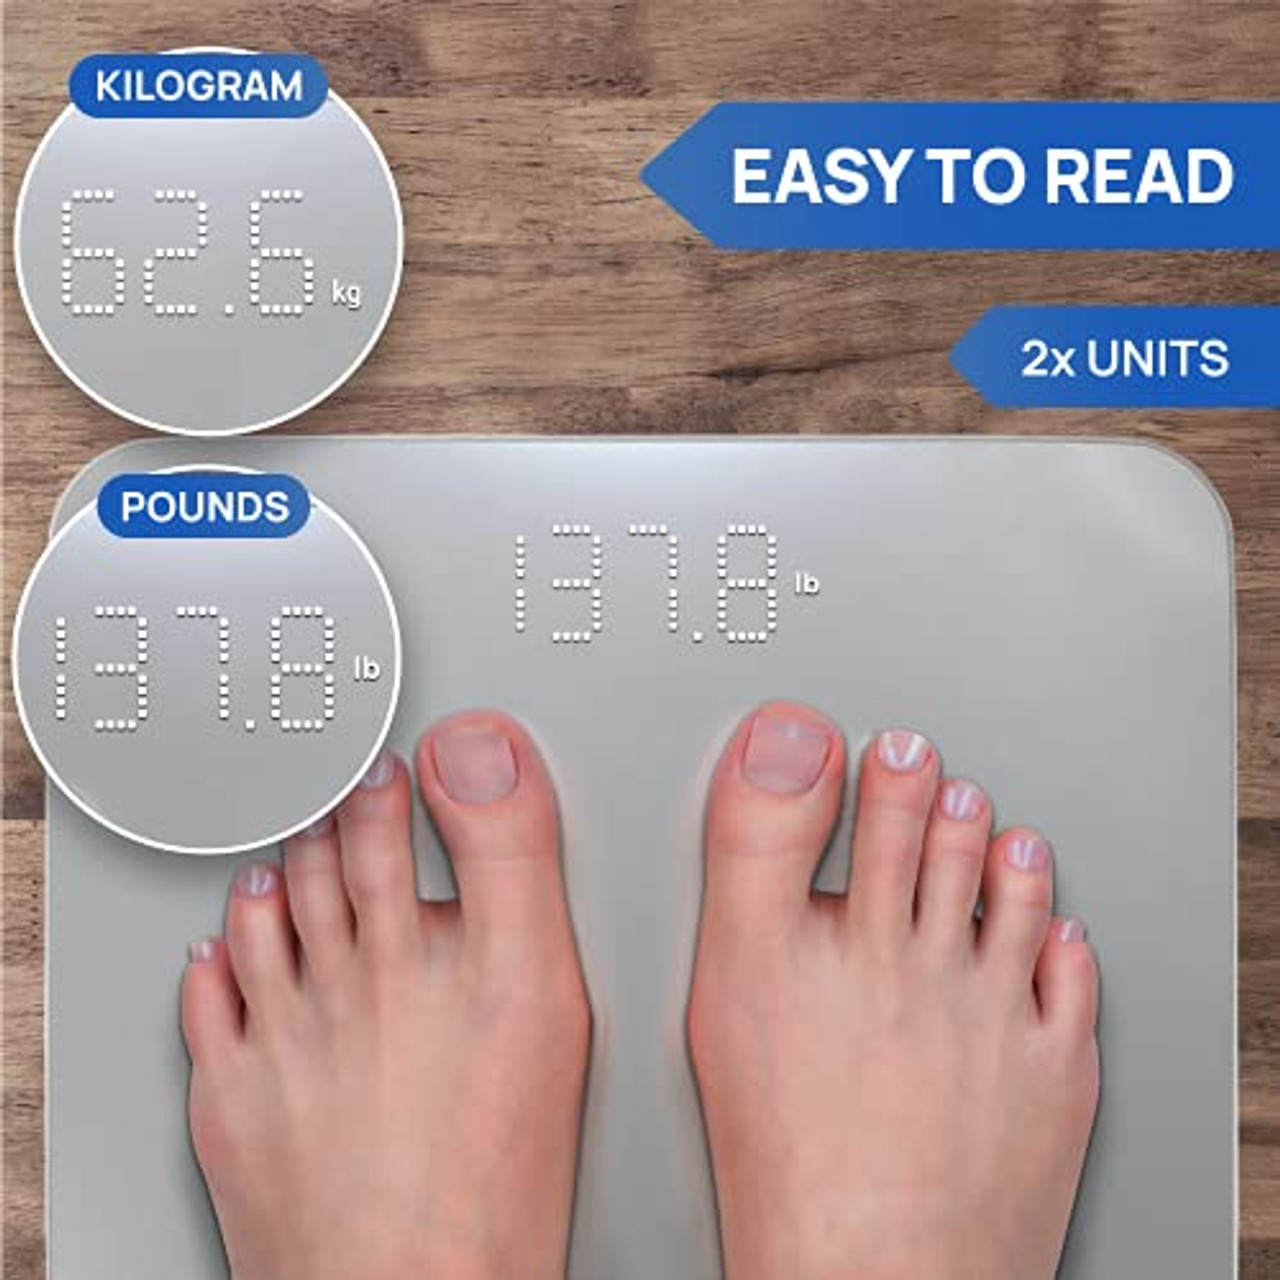 Accu-Measure Digital Scale - Accurate and Precise - Bathroom and Home Scale  - Track Your Progress - Easy to Store - Up to 400 Pounds